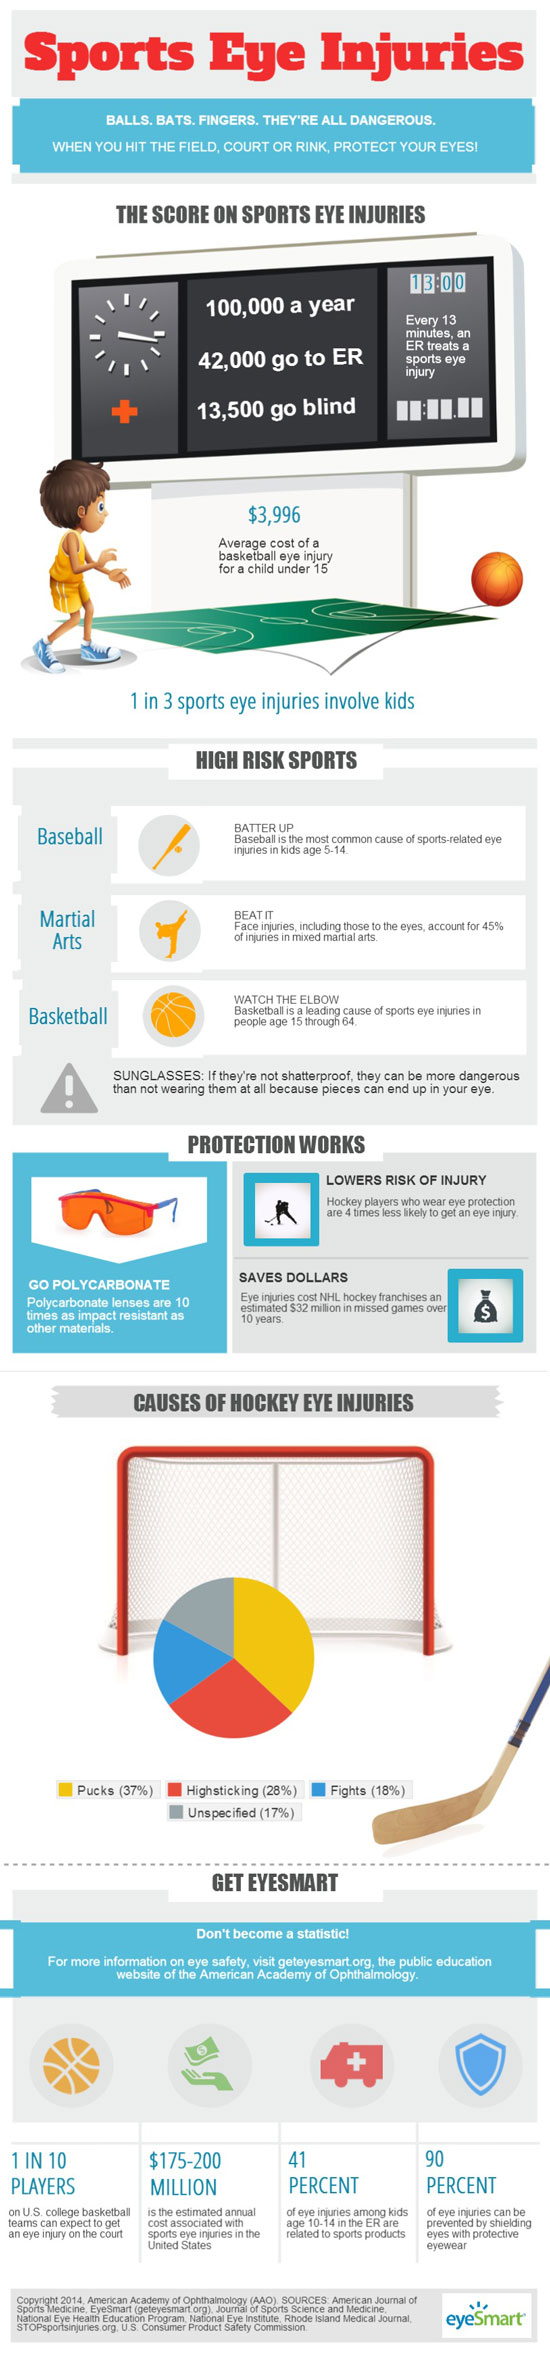 Eye Protection in Sports: The Evolution of the Hockey